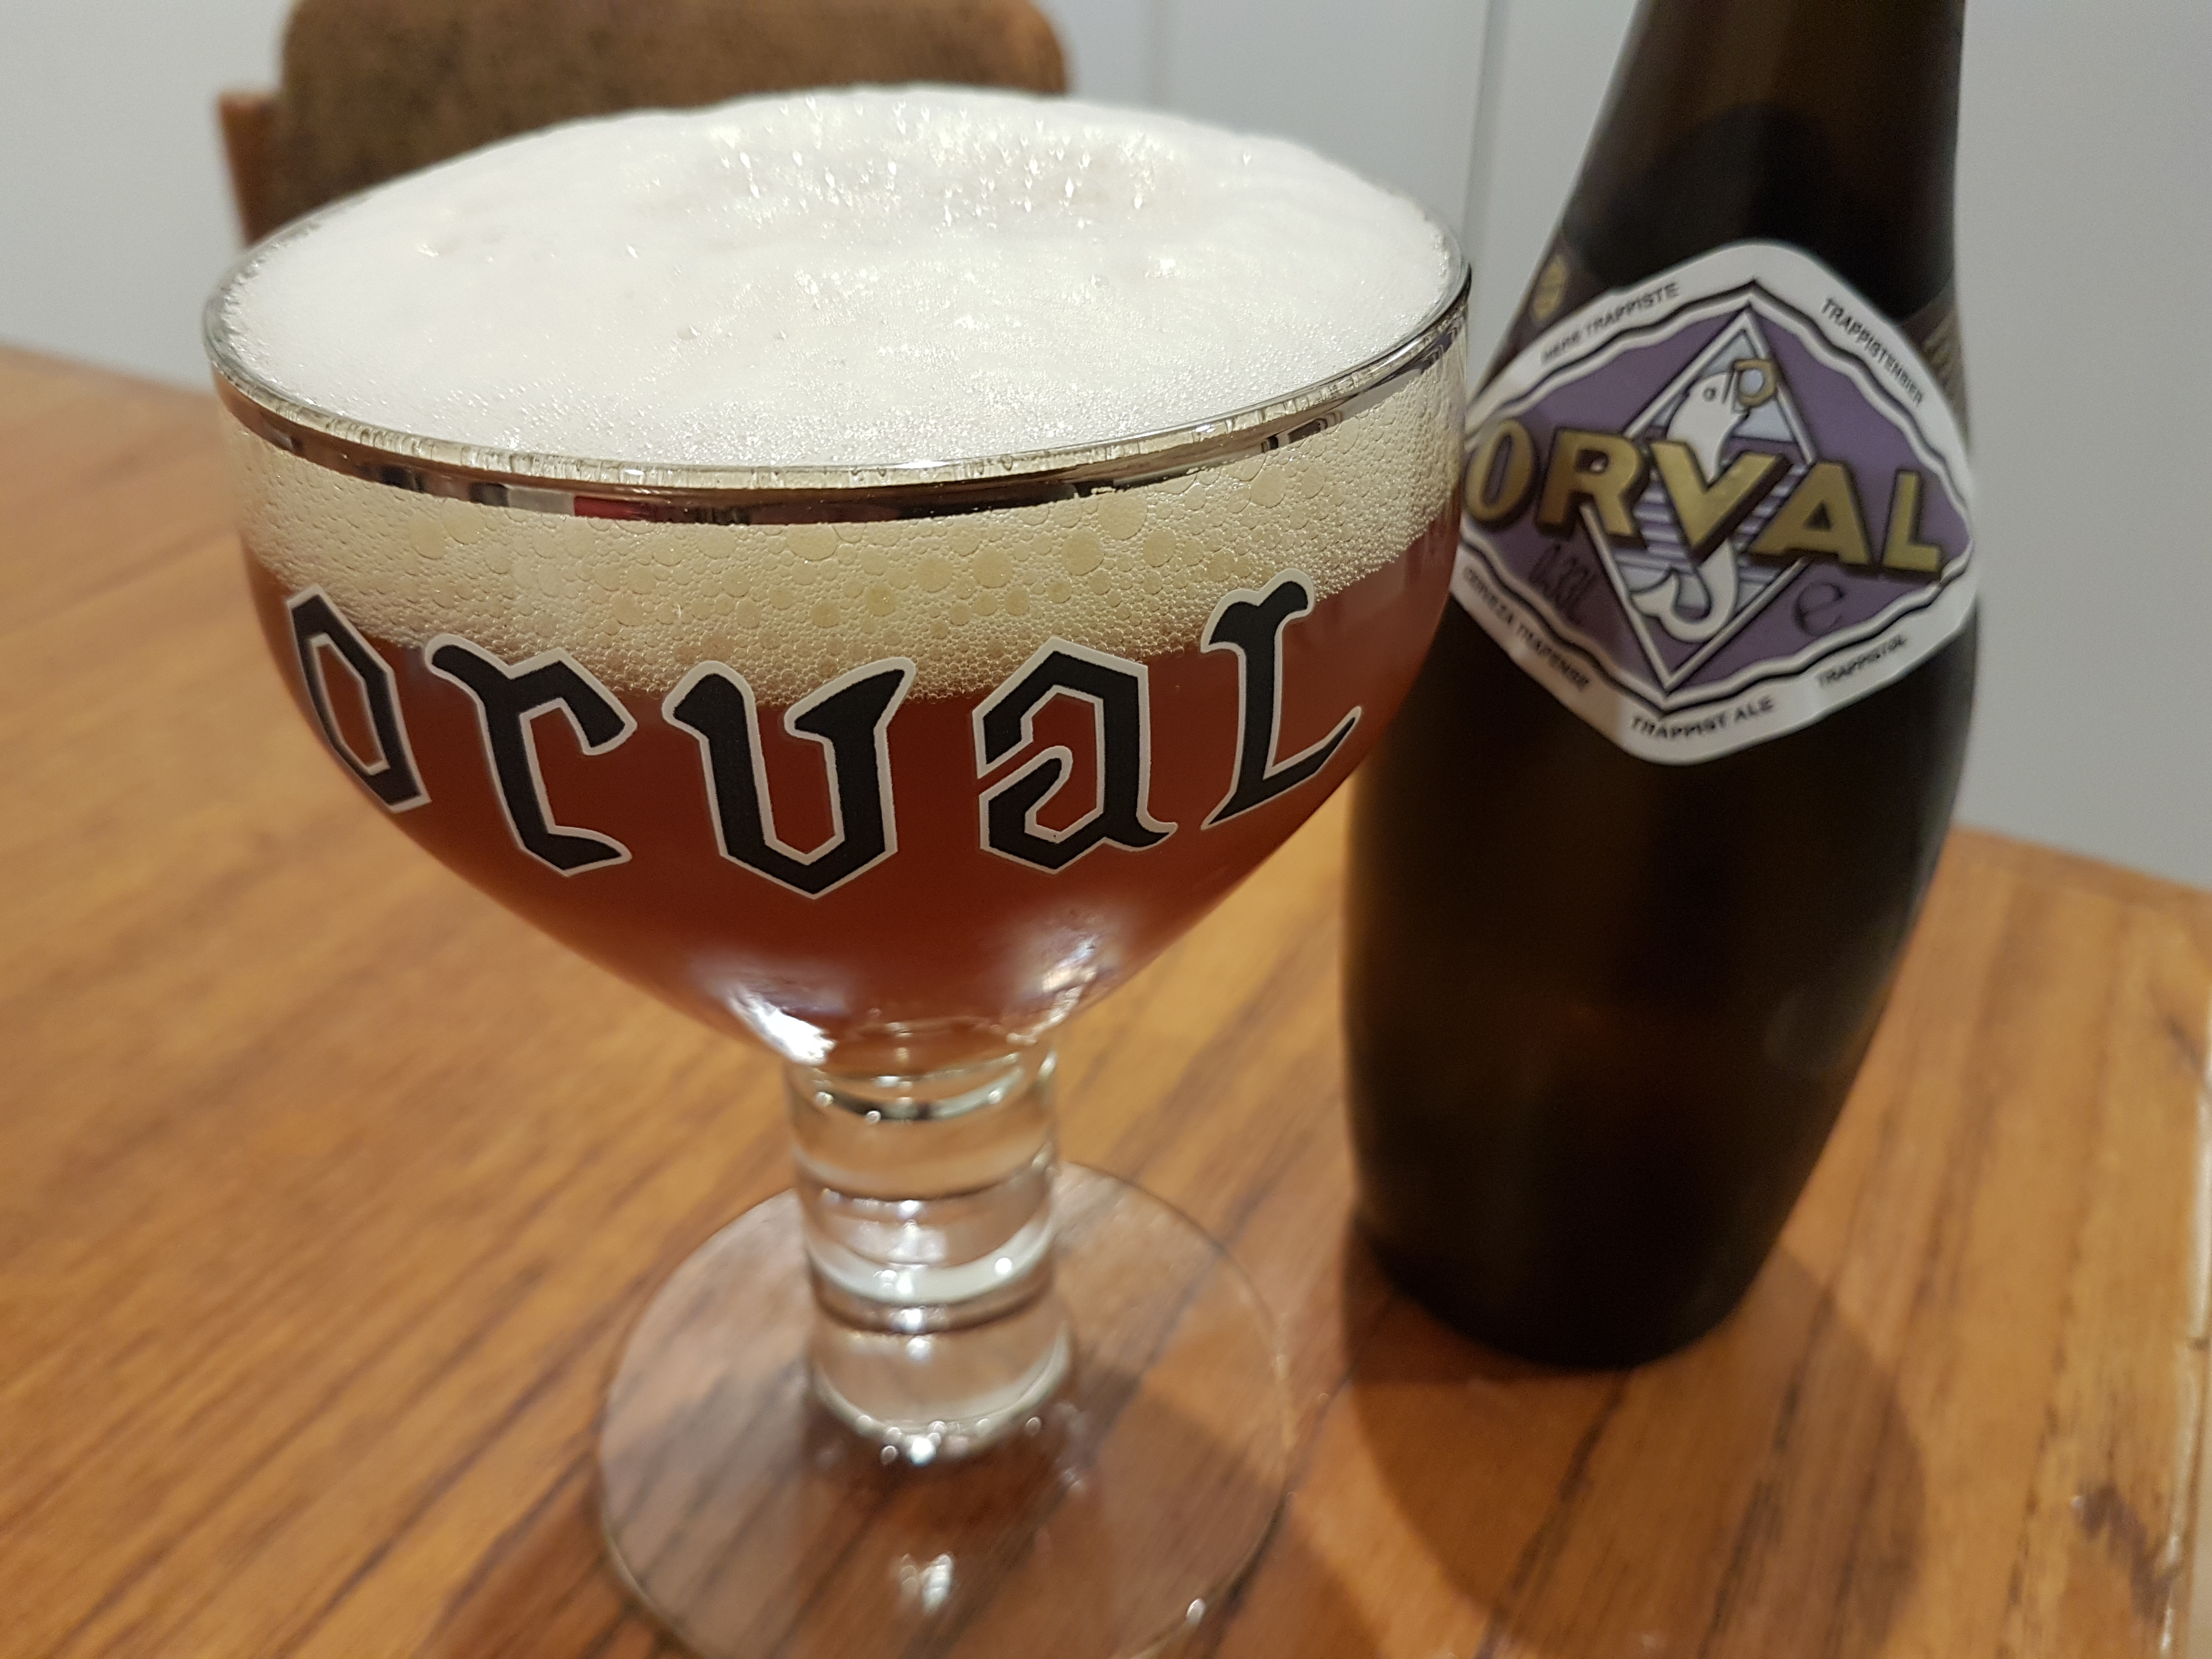 What are Belgian beers?